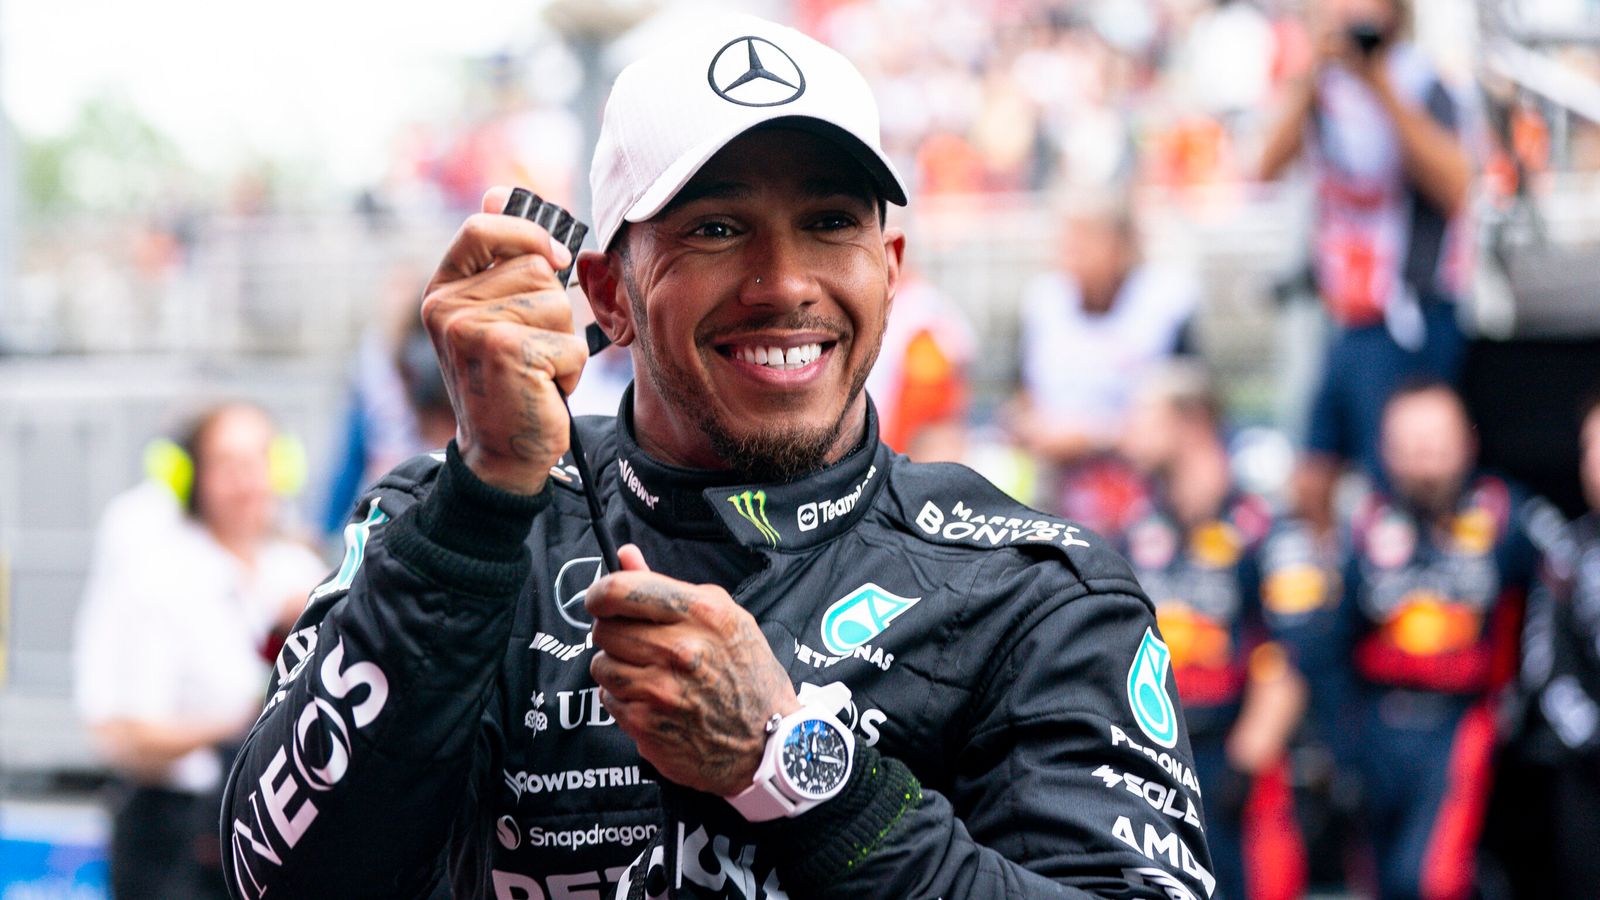 Lewis Hamilton confirms Mercedes F1 contract talks with Toto Wolff on Monday after Spanish Grand Prix